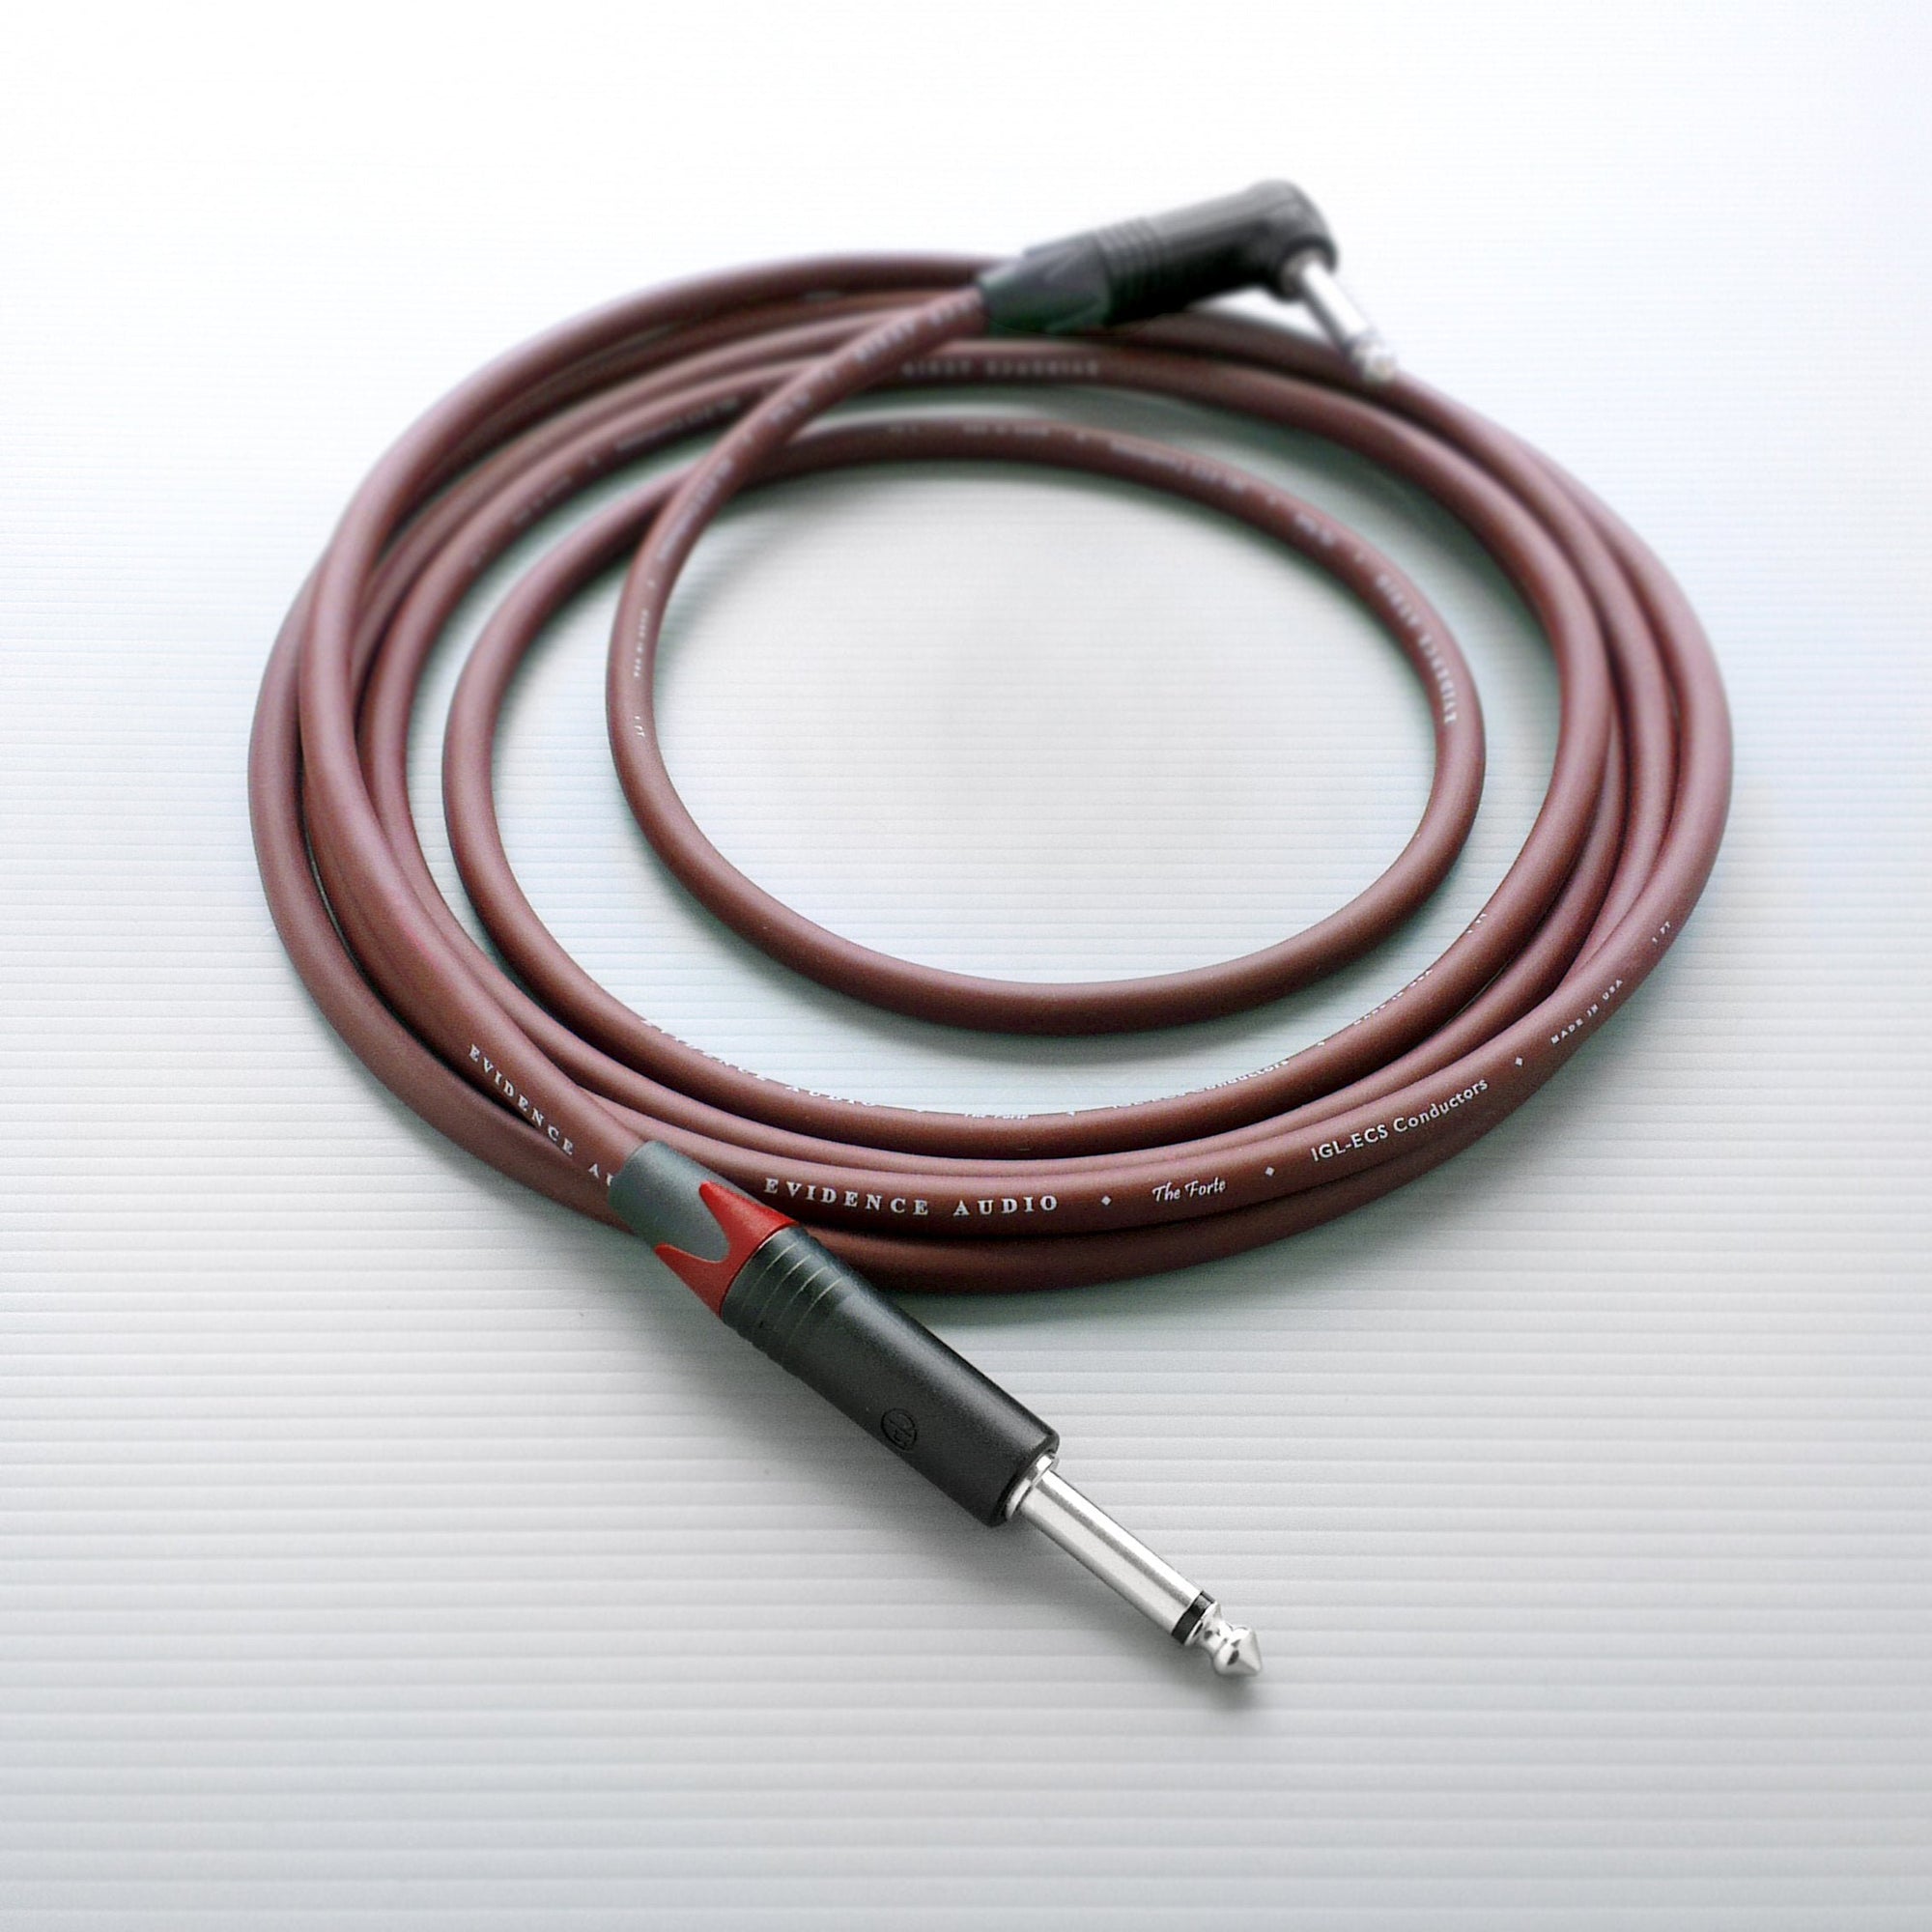 Evidence Audio Forte Guitar Cable - 15ft: Straight to Right Angle